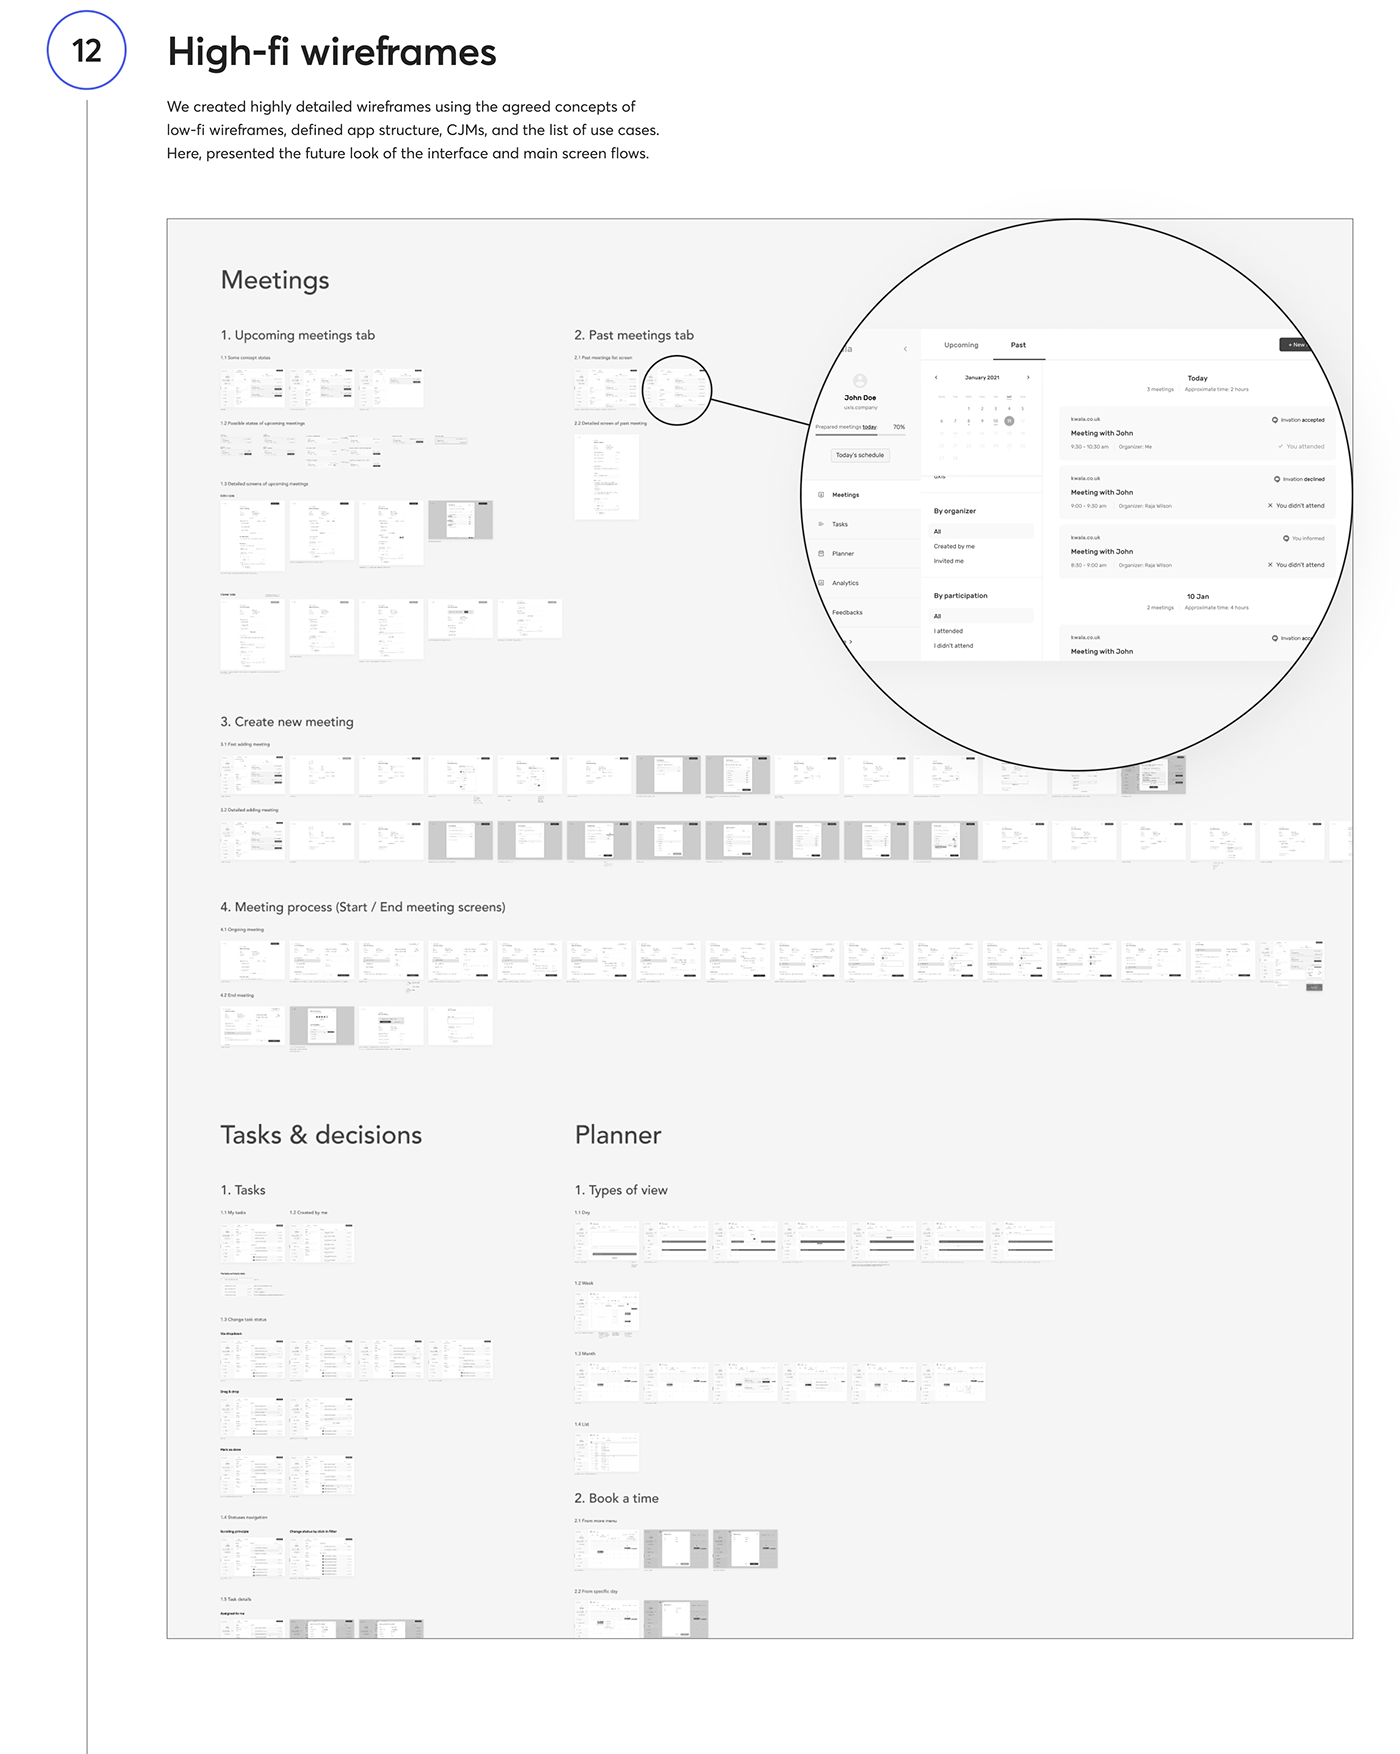 UX design Case Study ux web app UI/UX UX Designer interface design user experience wireframes research